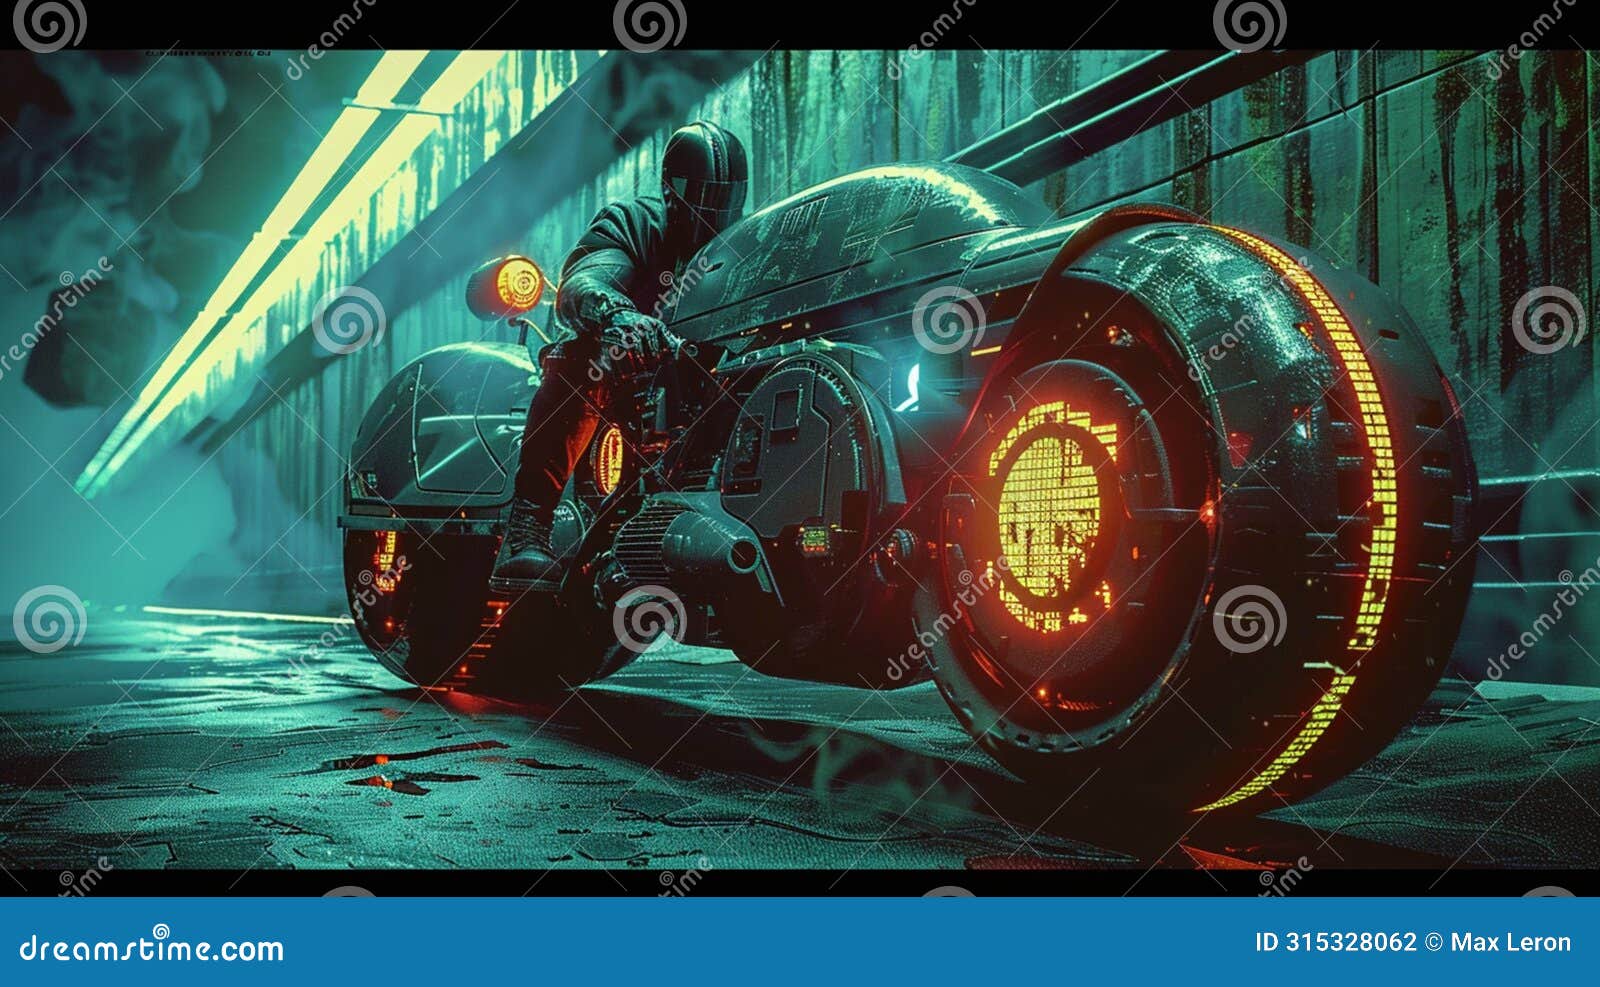 blade runner light cycle, sci-fi directed 4k multi-angle production stills, red imax misterio